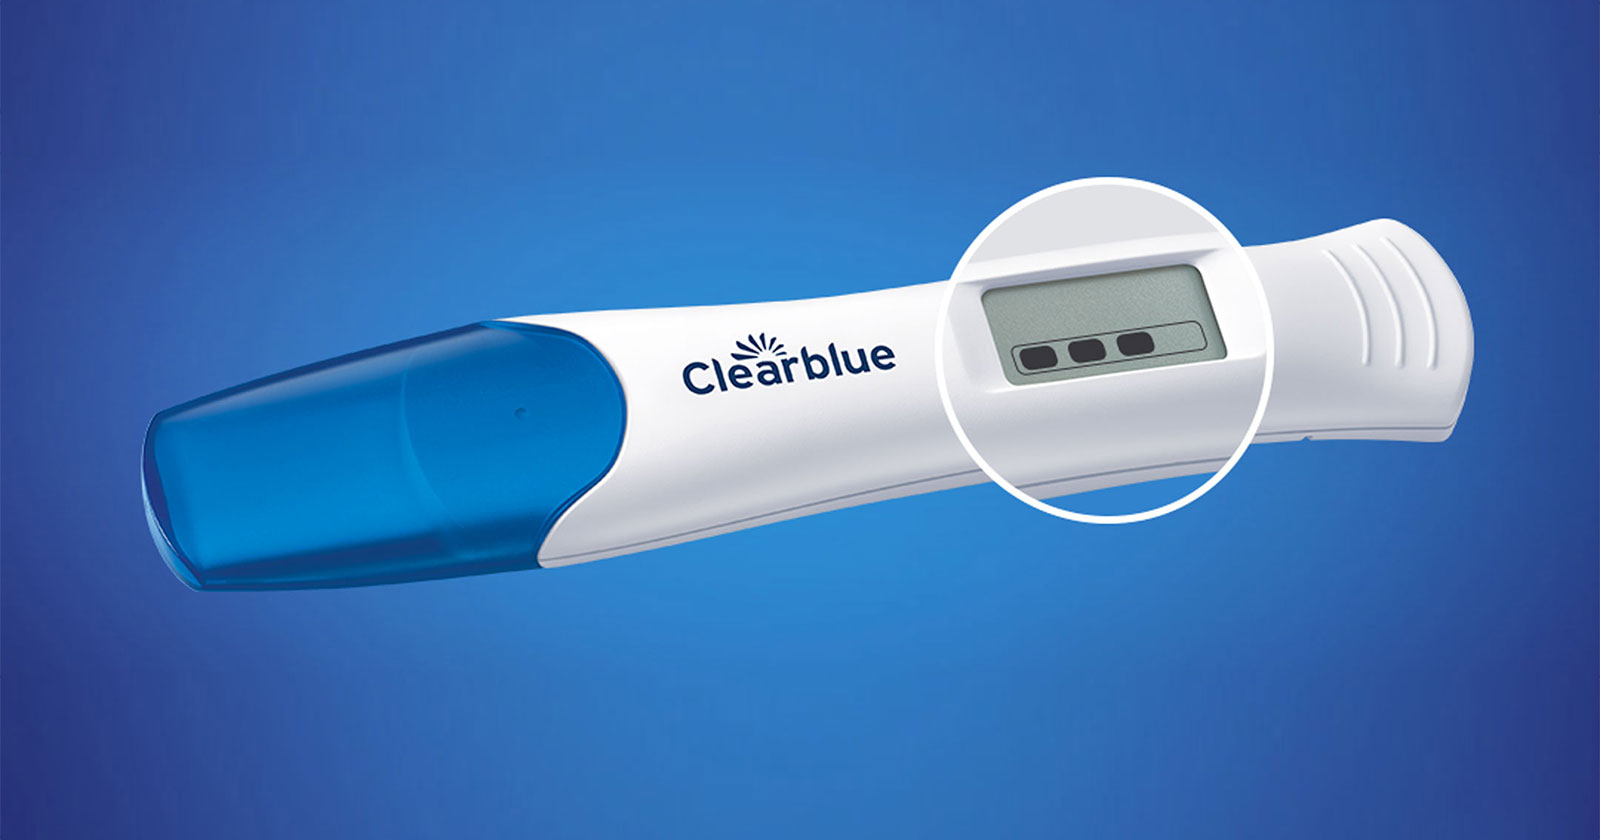 Clearblue Triple Check Pregnancy Test - Only 2 Left at this Price